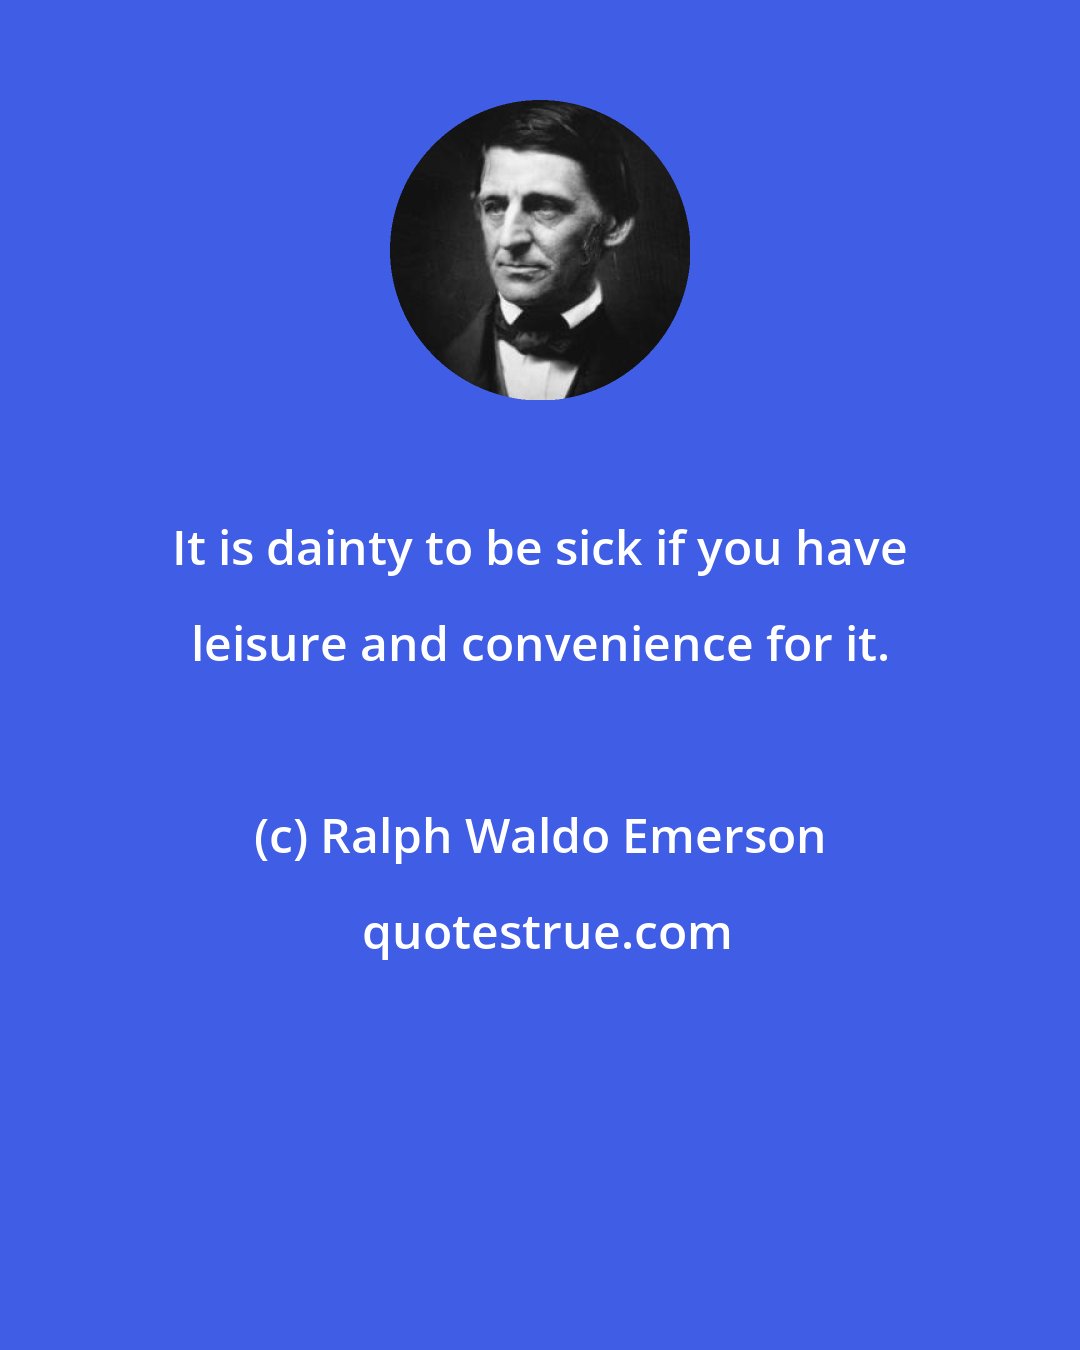 Ralph Waldo Emerson: It is dainty to be sick if you have leisure and convenience for it.